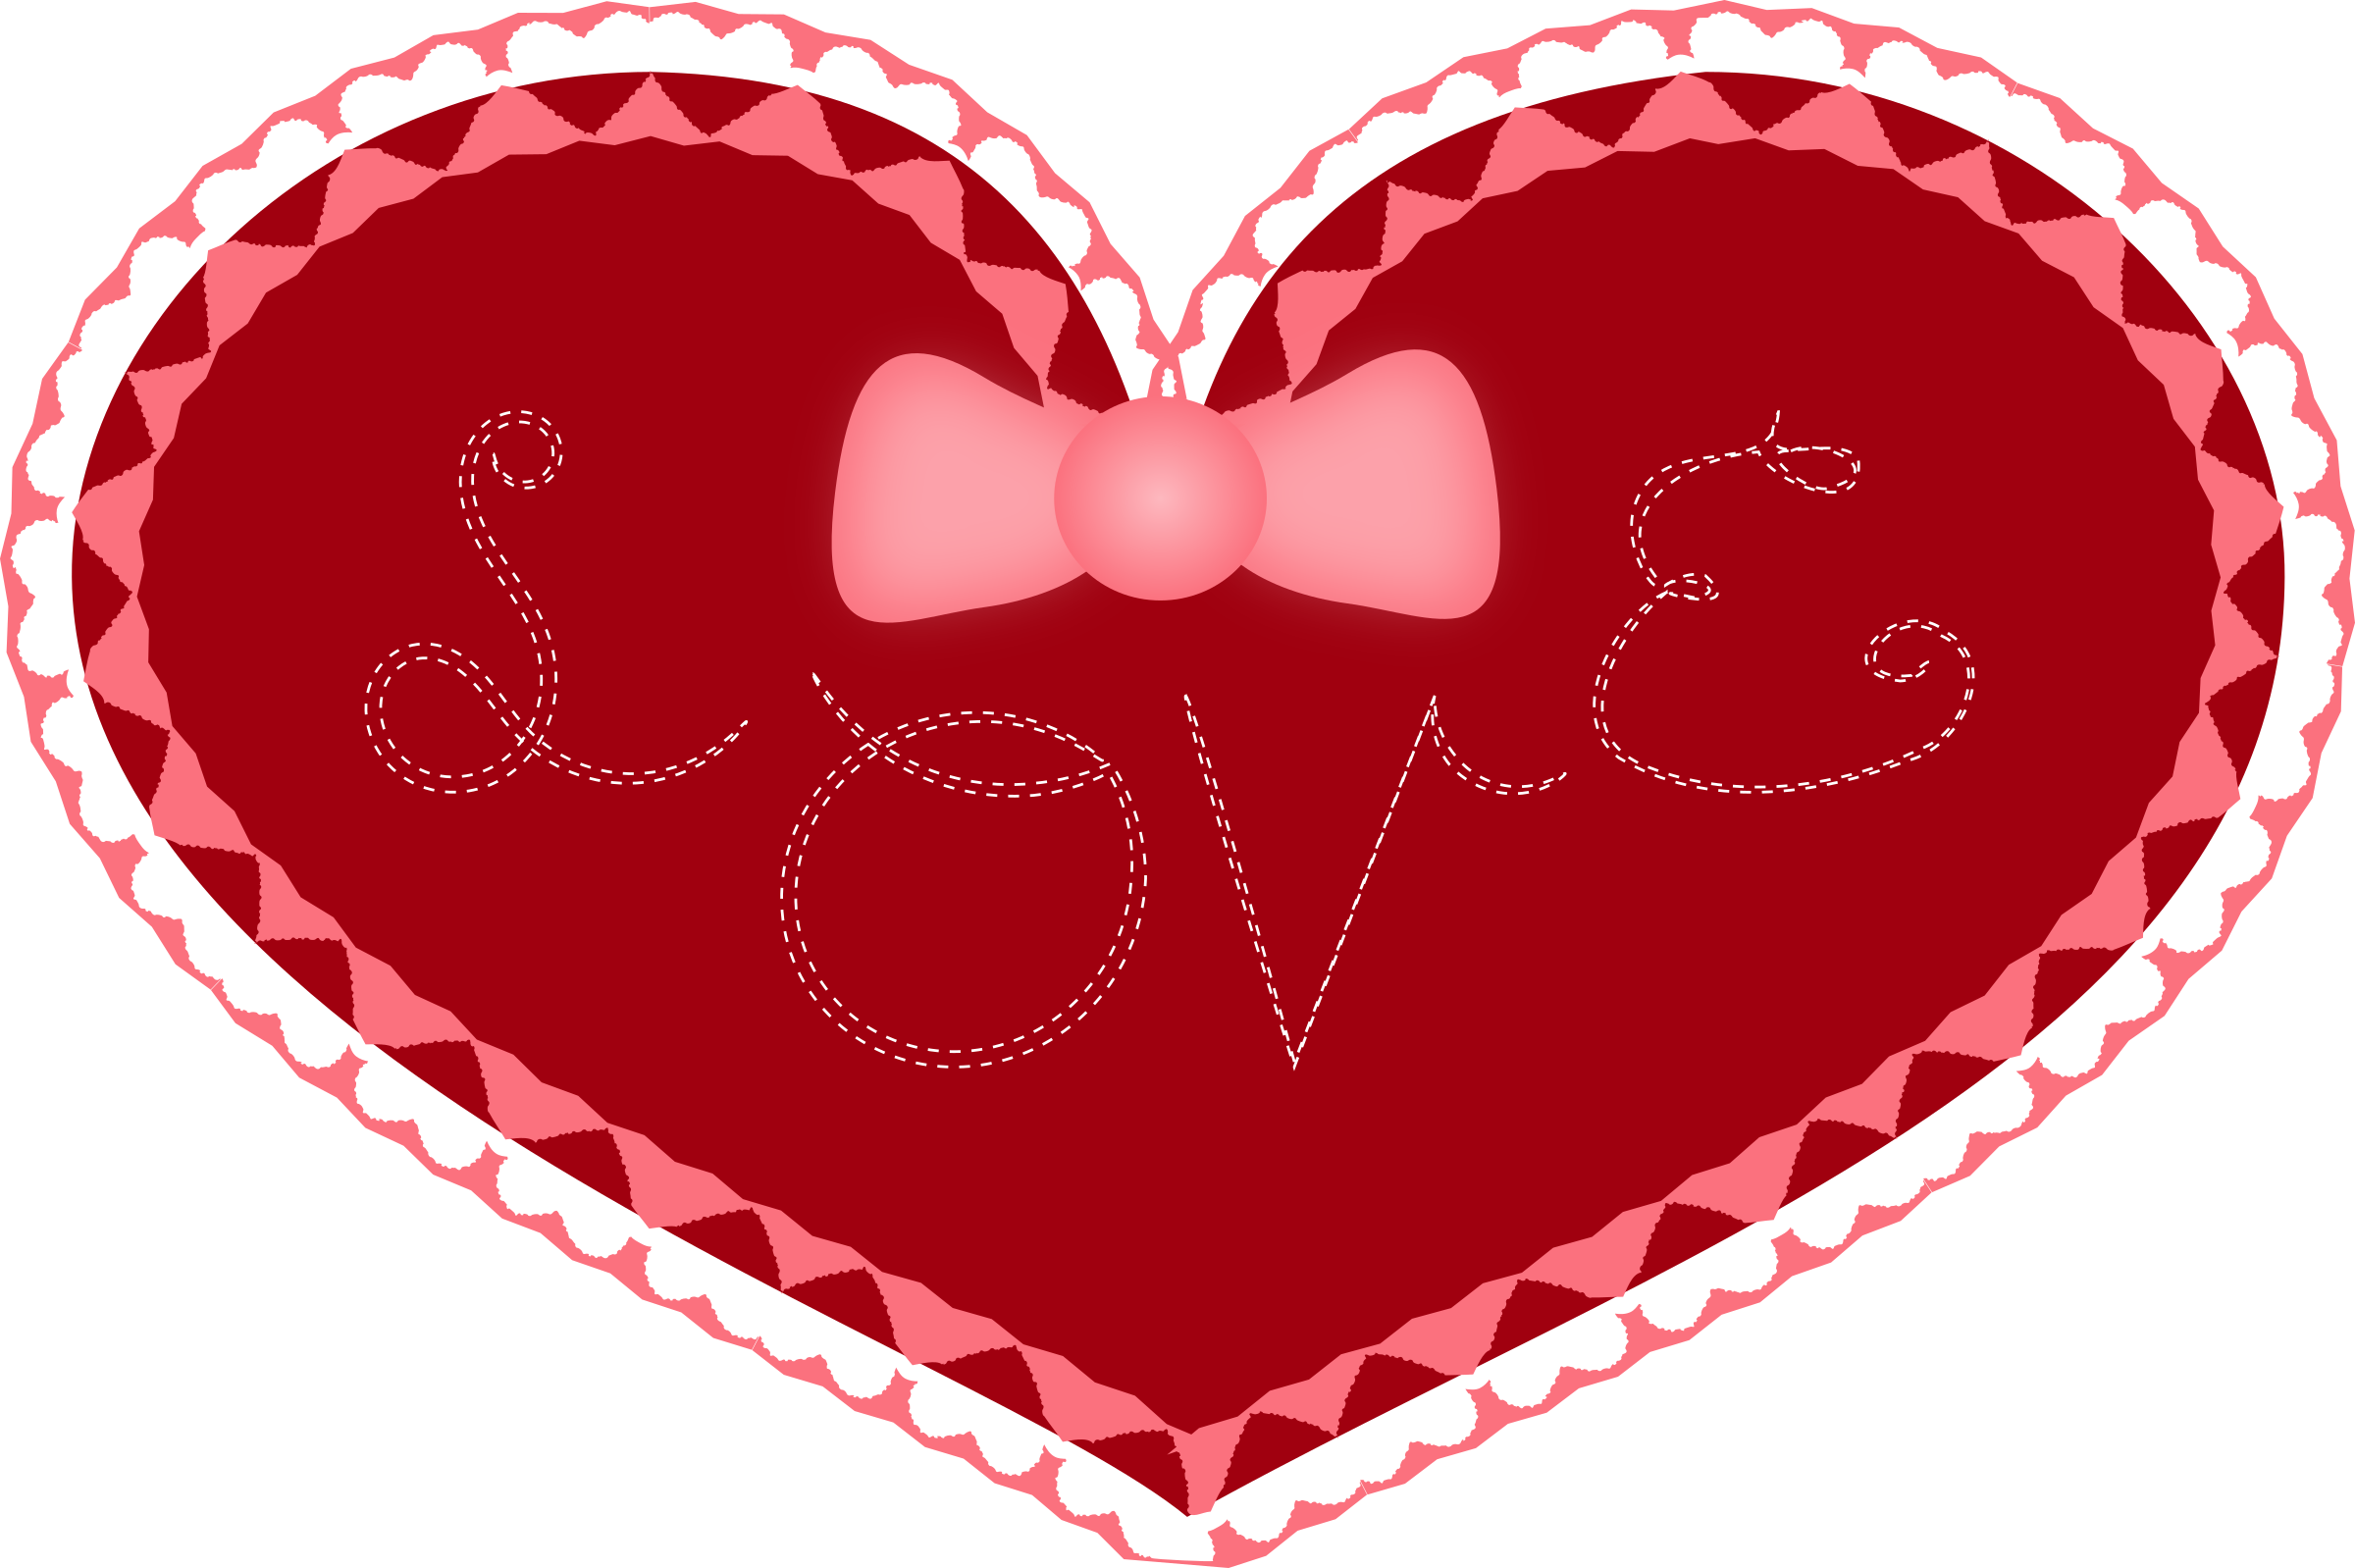 Happy Valentines Day Animated Clipart | Free download best Happy Valentines Day ...